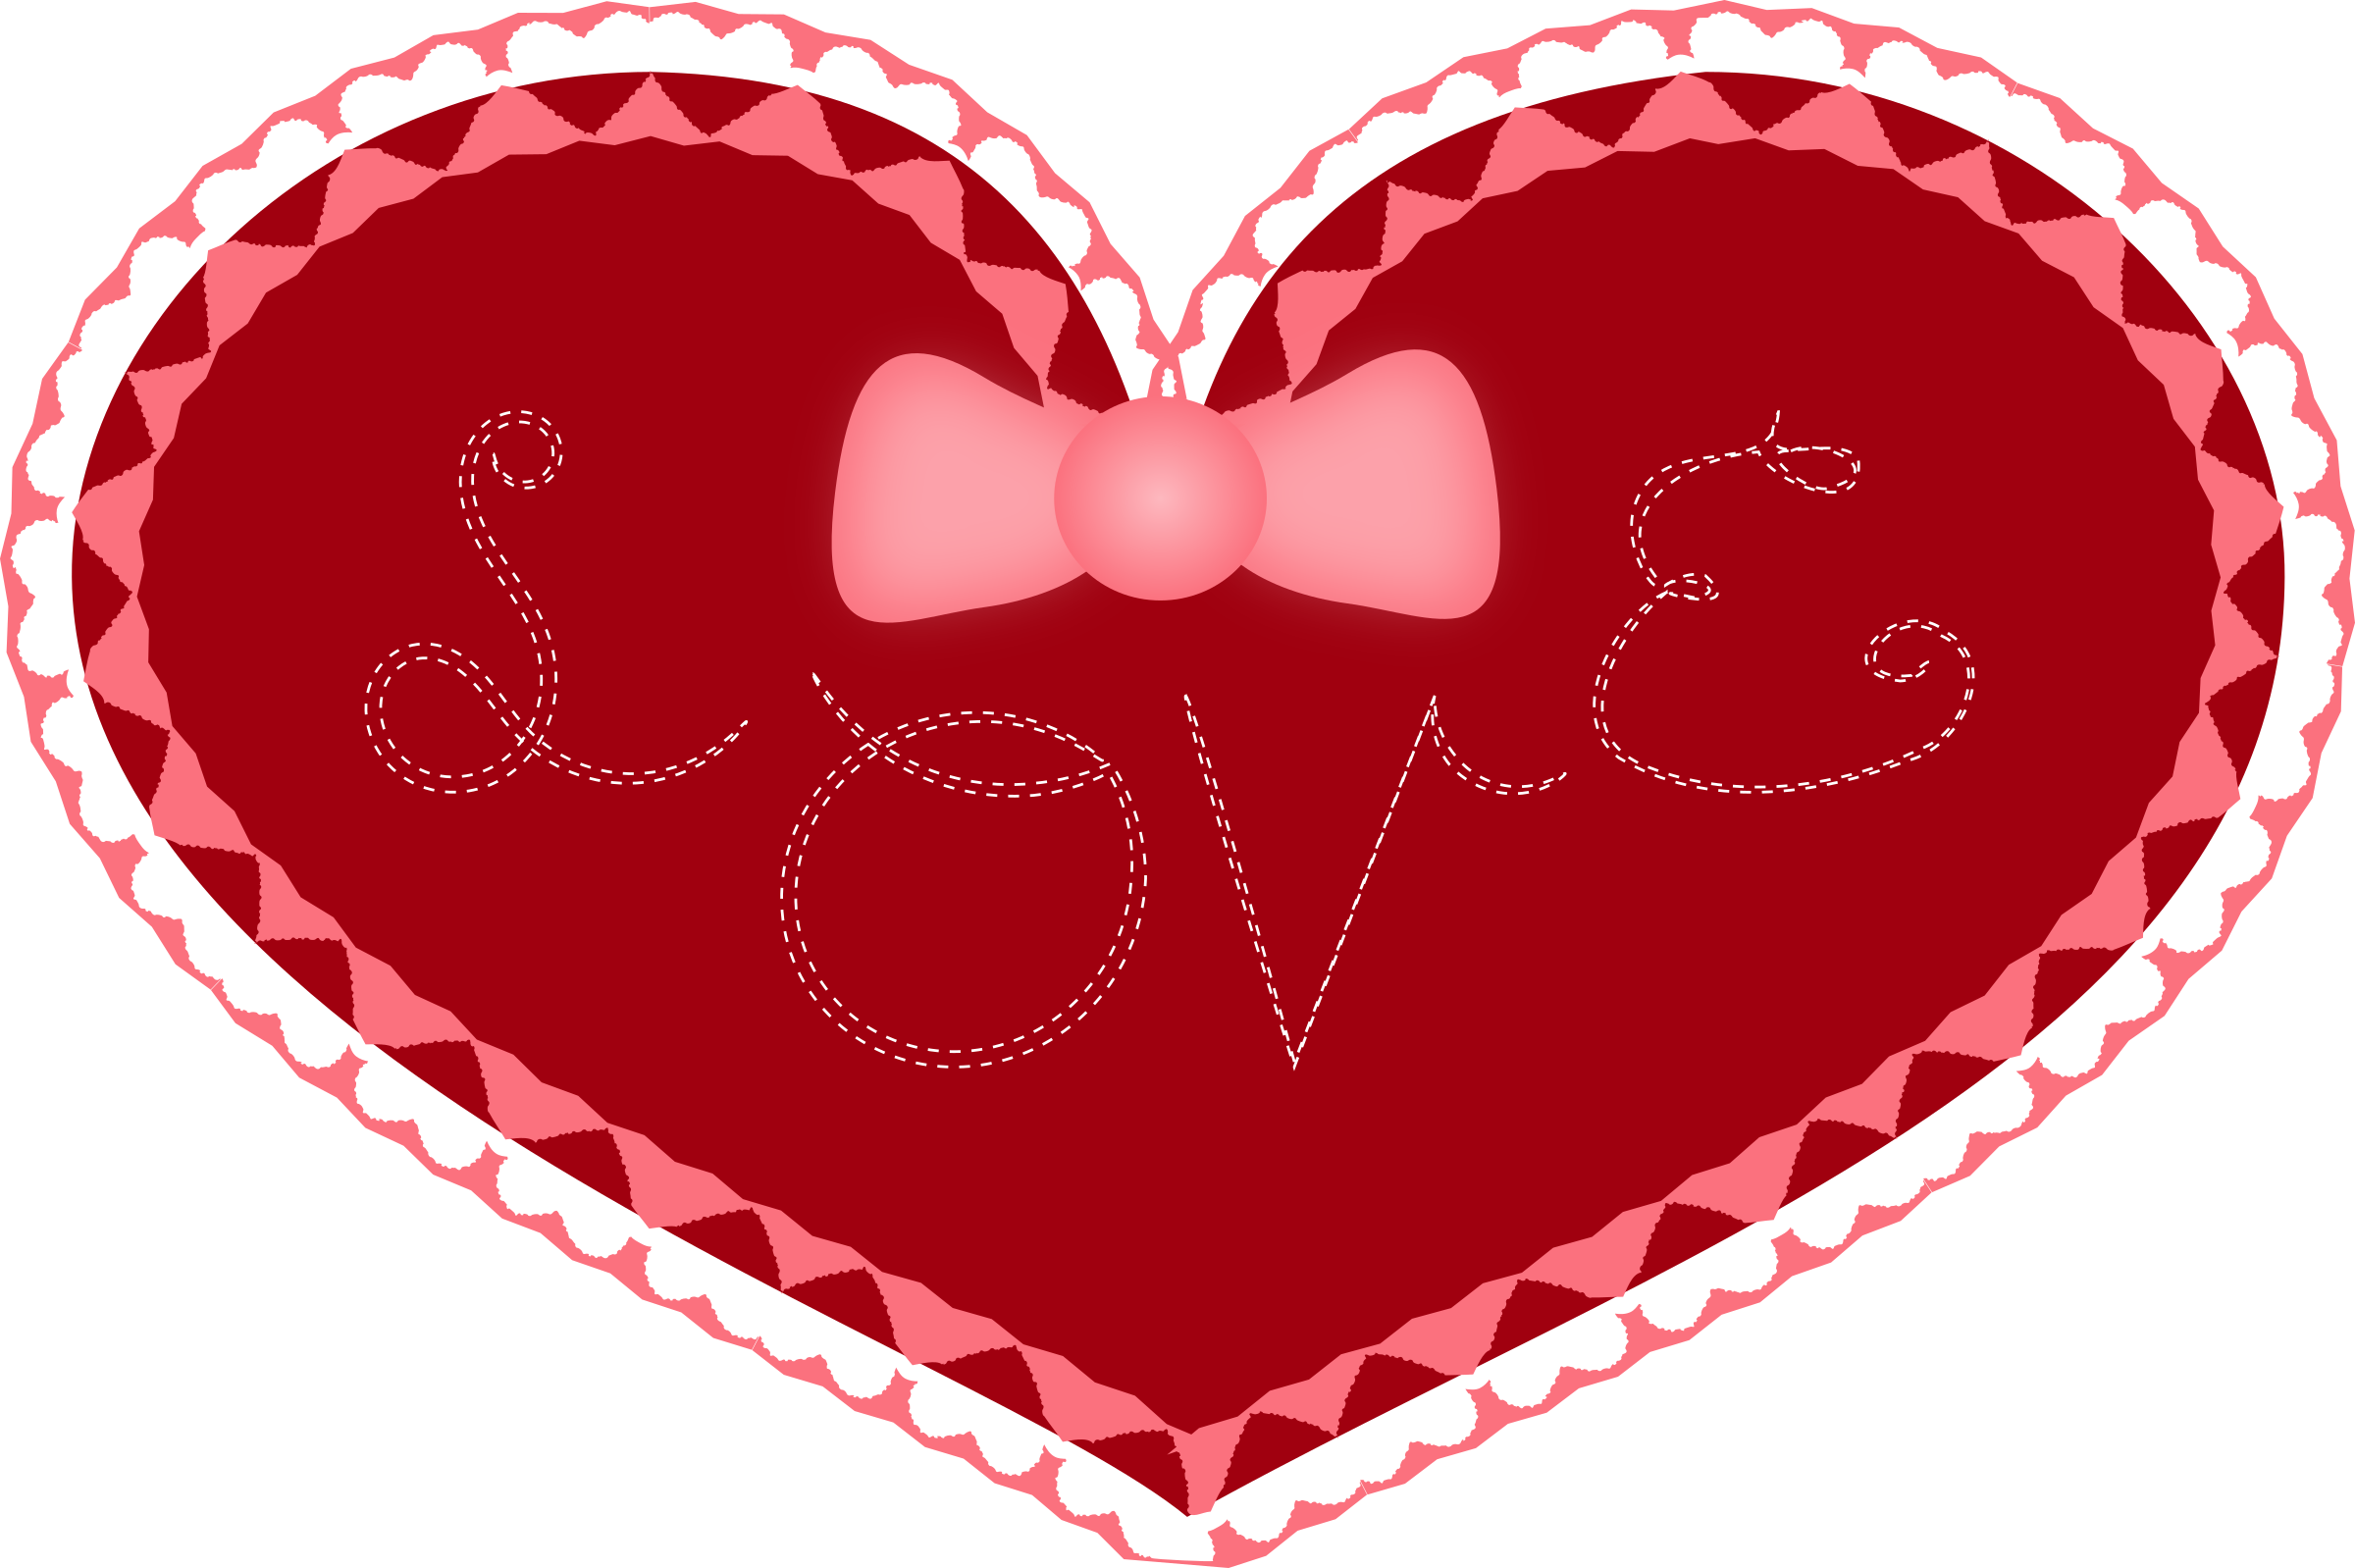 Happy Valentines Day Animated Clipart | Free download best Happy Valentines Day ...